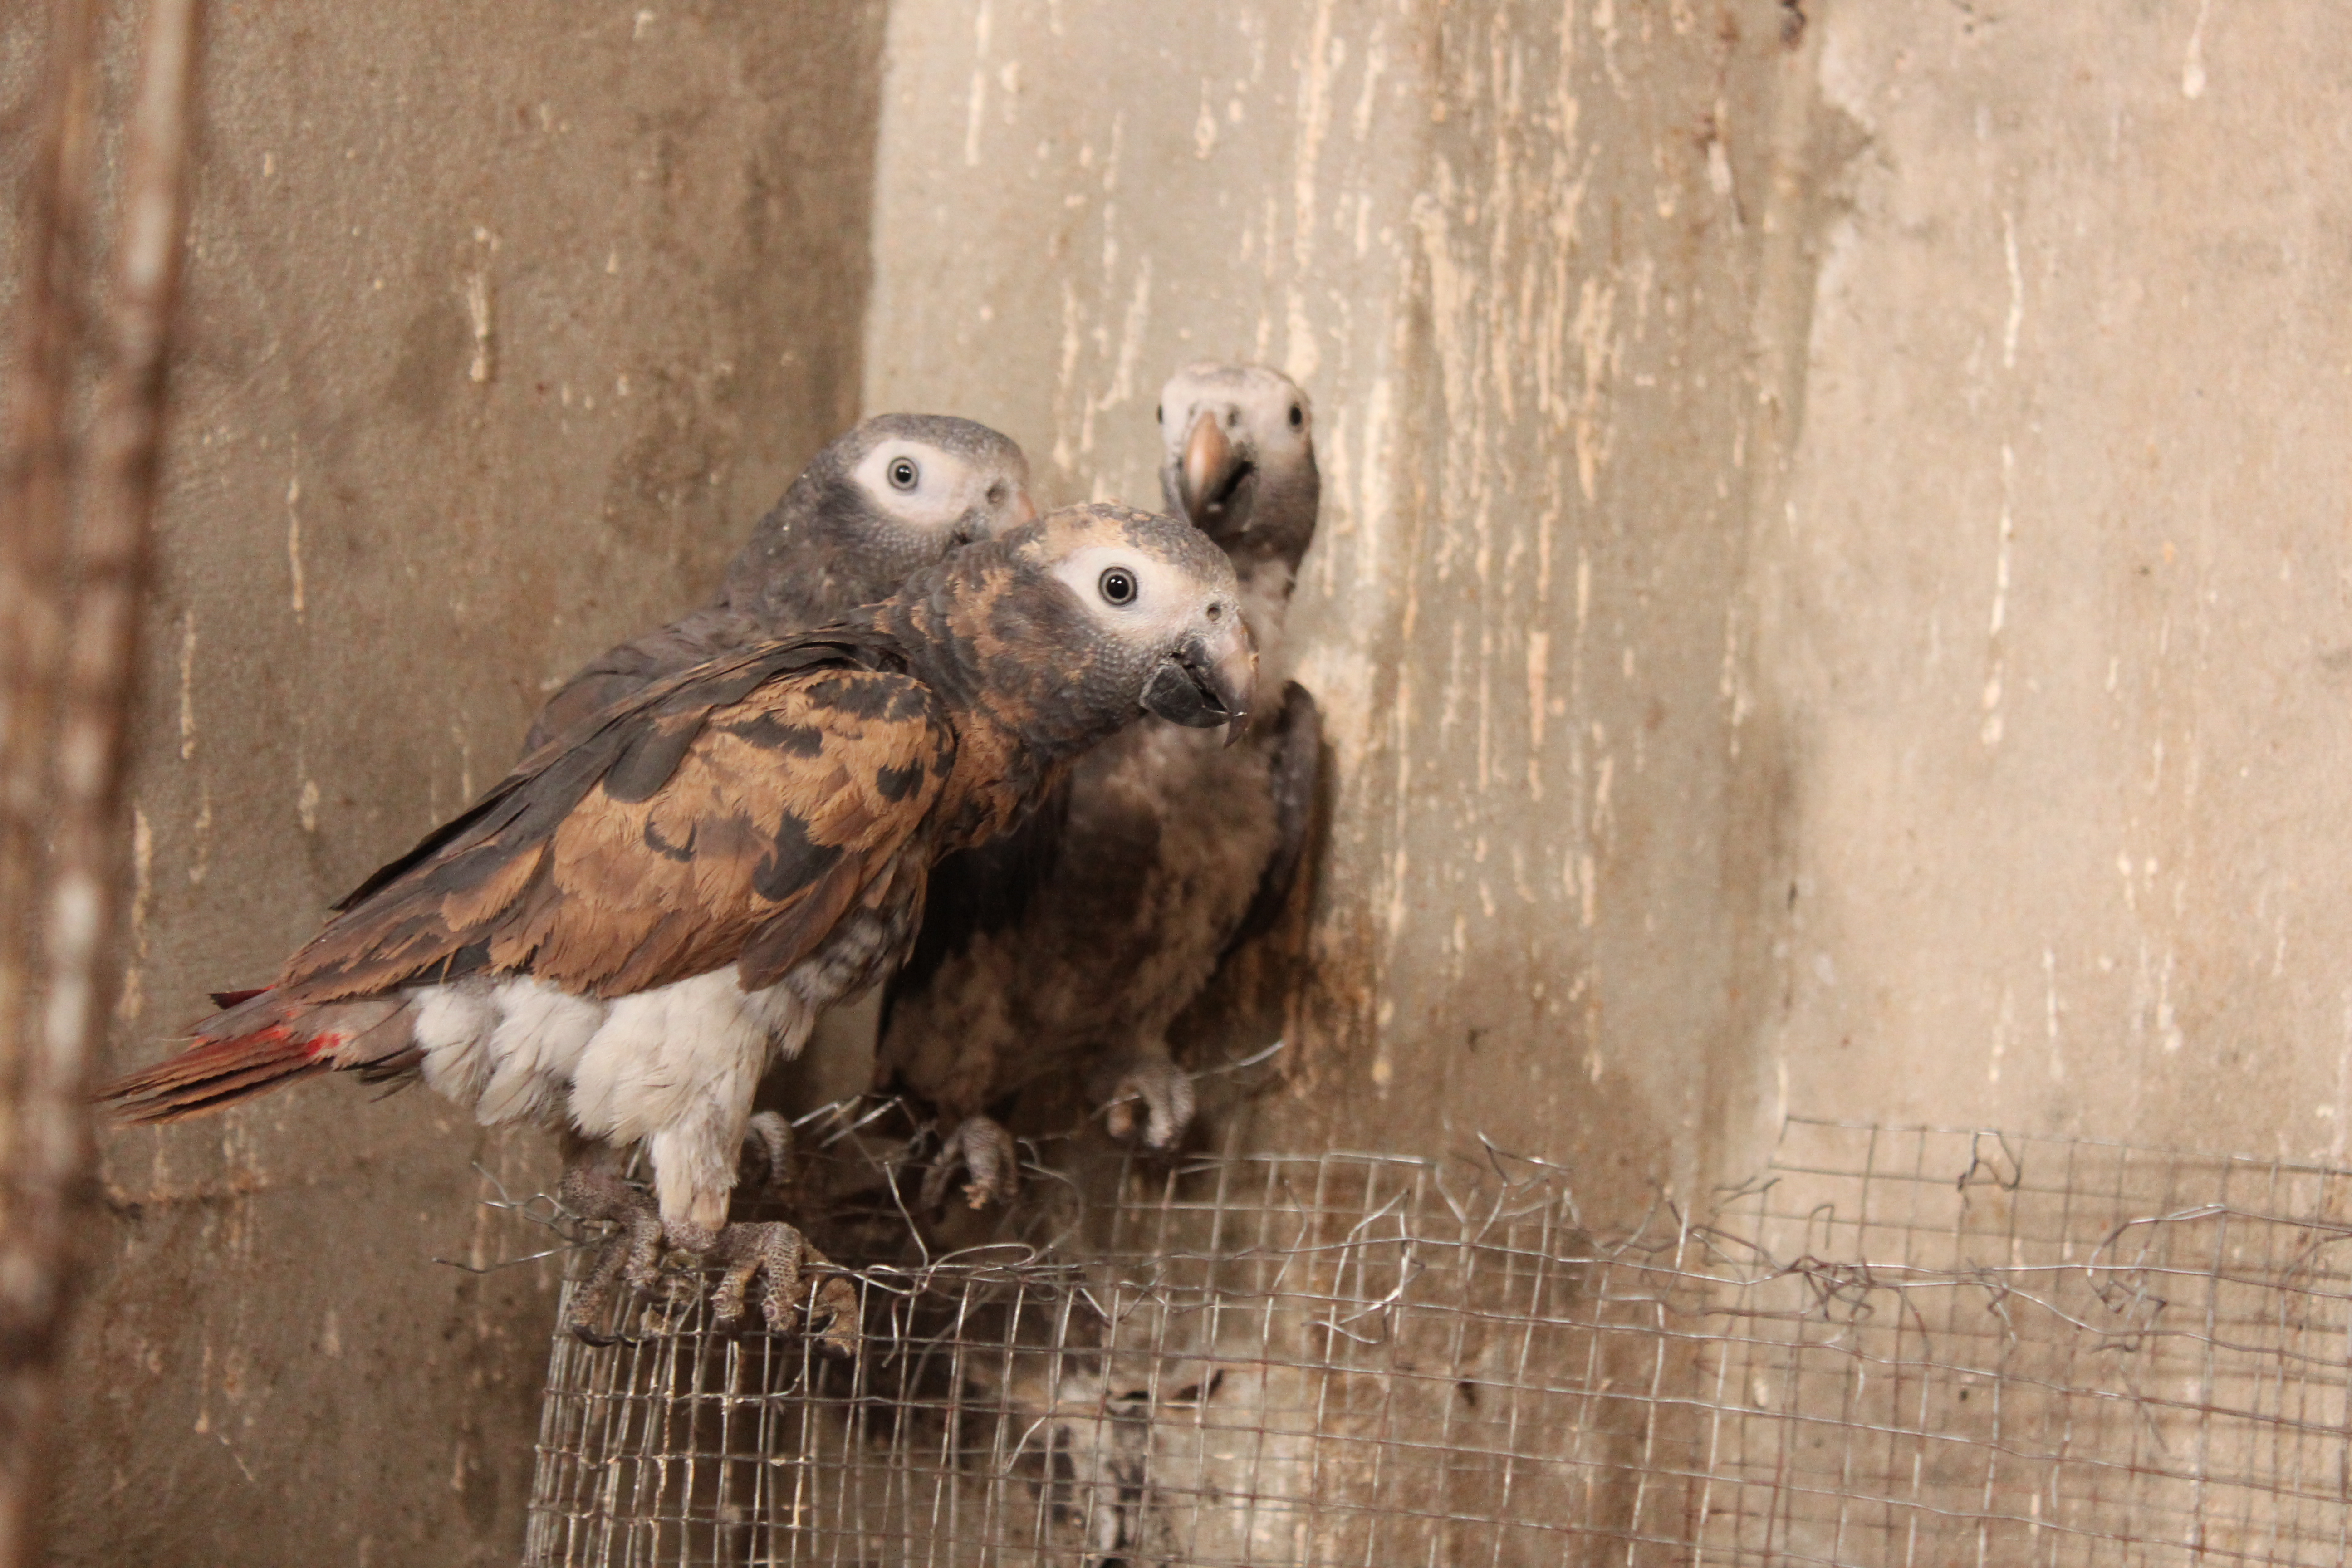 Timneh parrots in illegal trade in West Africa (credit Rowan Martin/WPT)